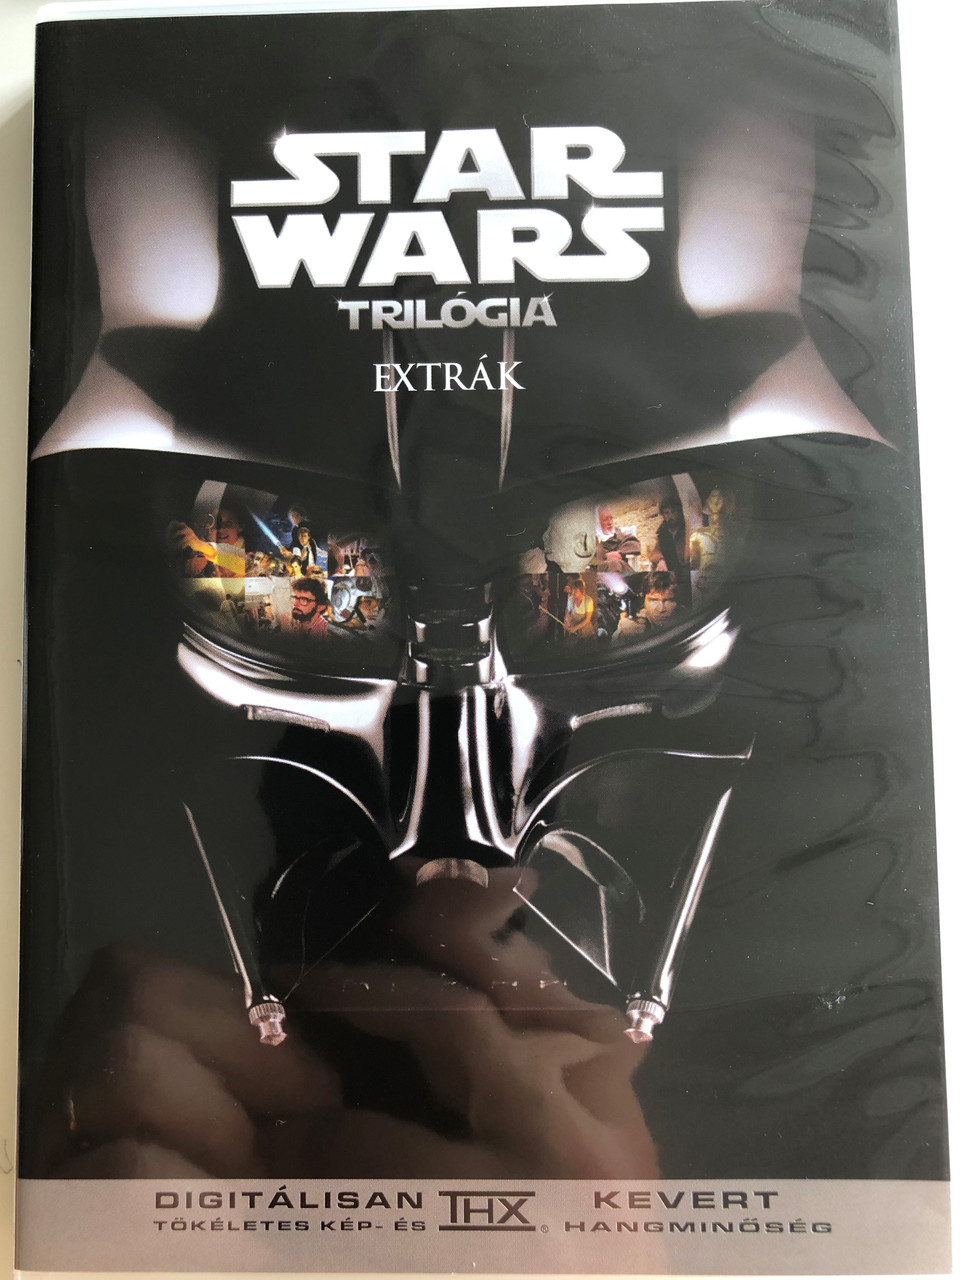 Star Wars Trilogy Extras DVD 2004 Star Wars Trilógia Extrák / Documentary  and Featurettes / Trailers and TV Spots / Video Games / Ep. III Preview -  bibleinmylanguage